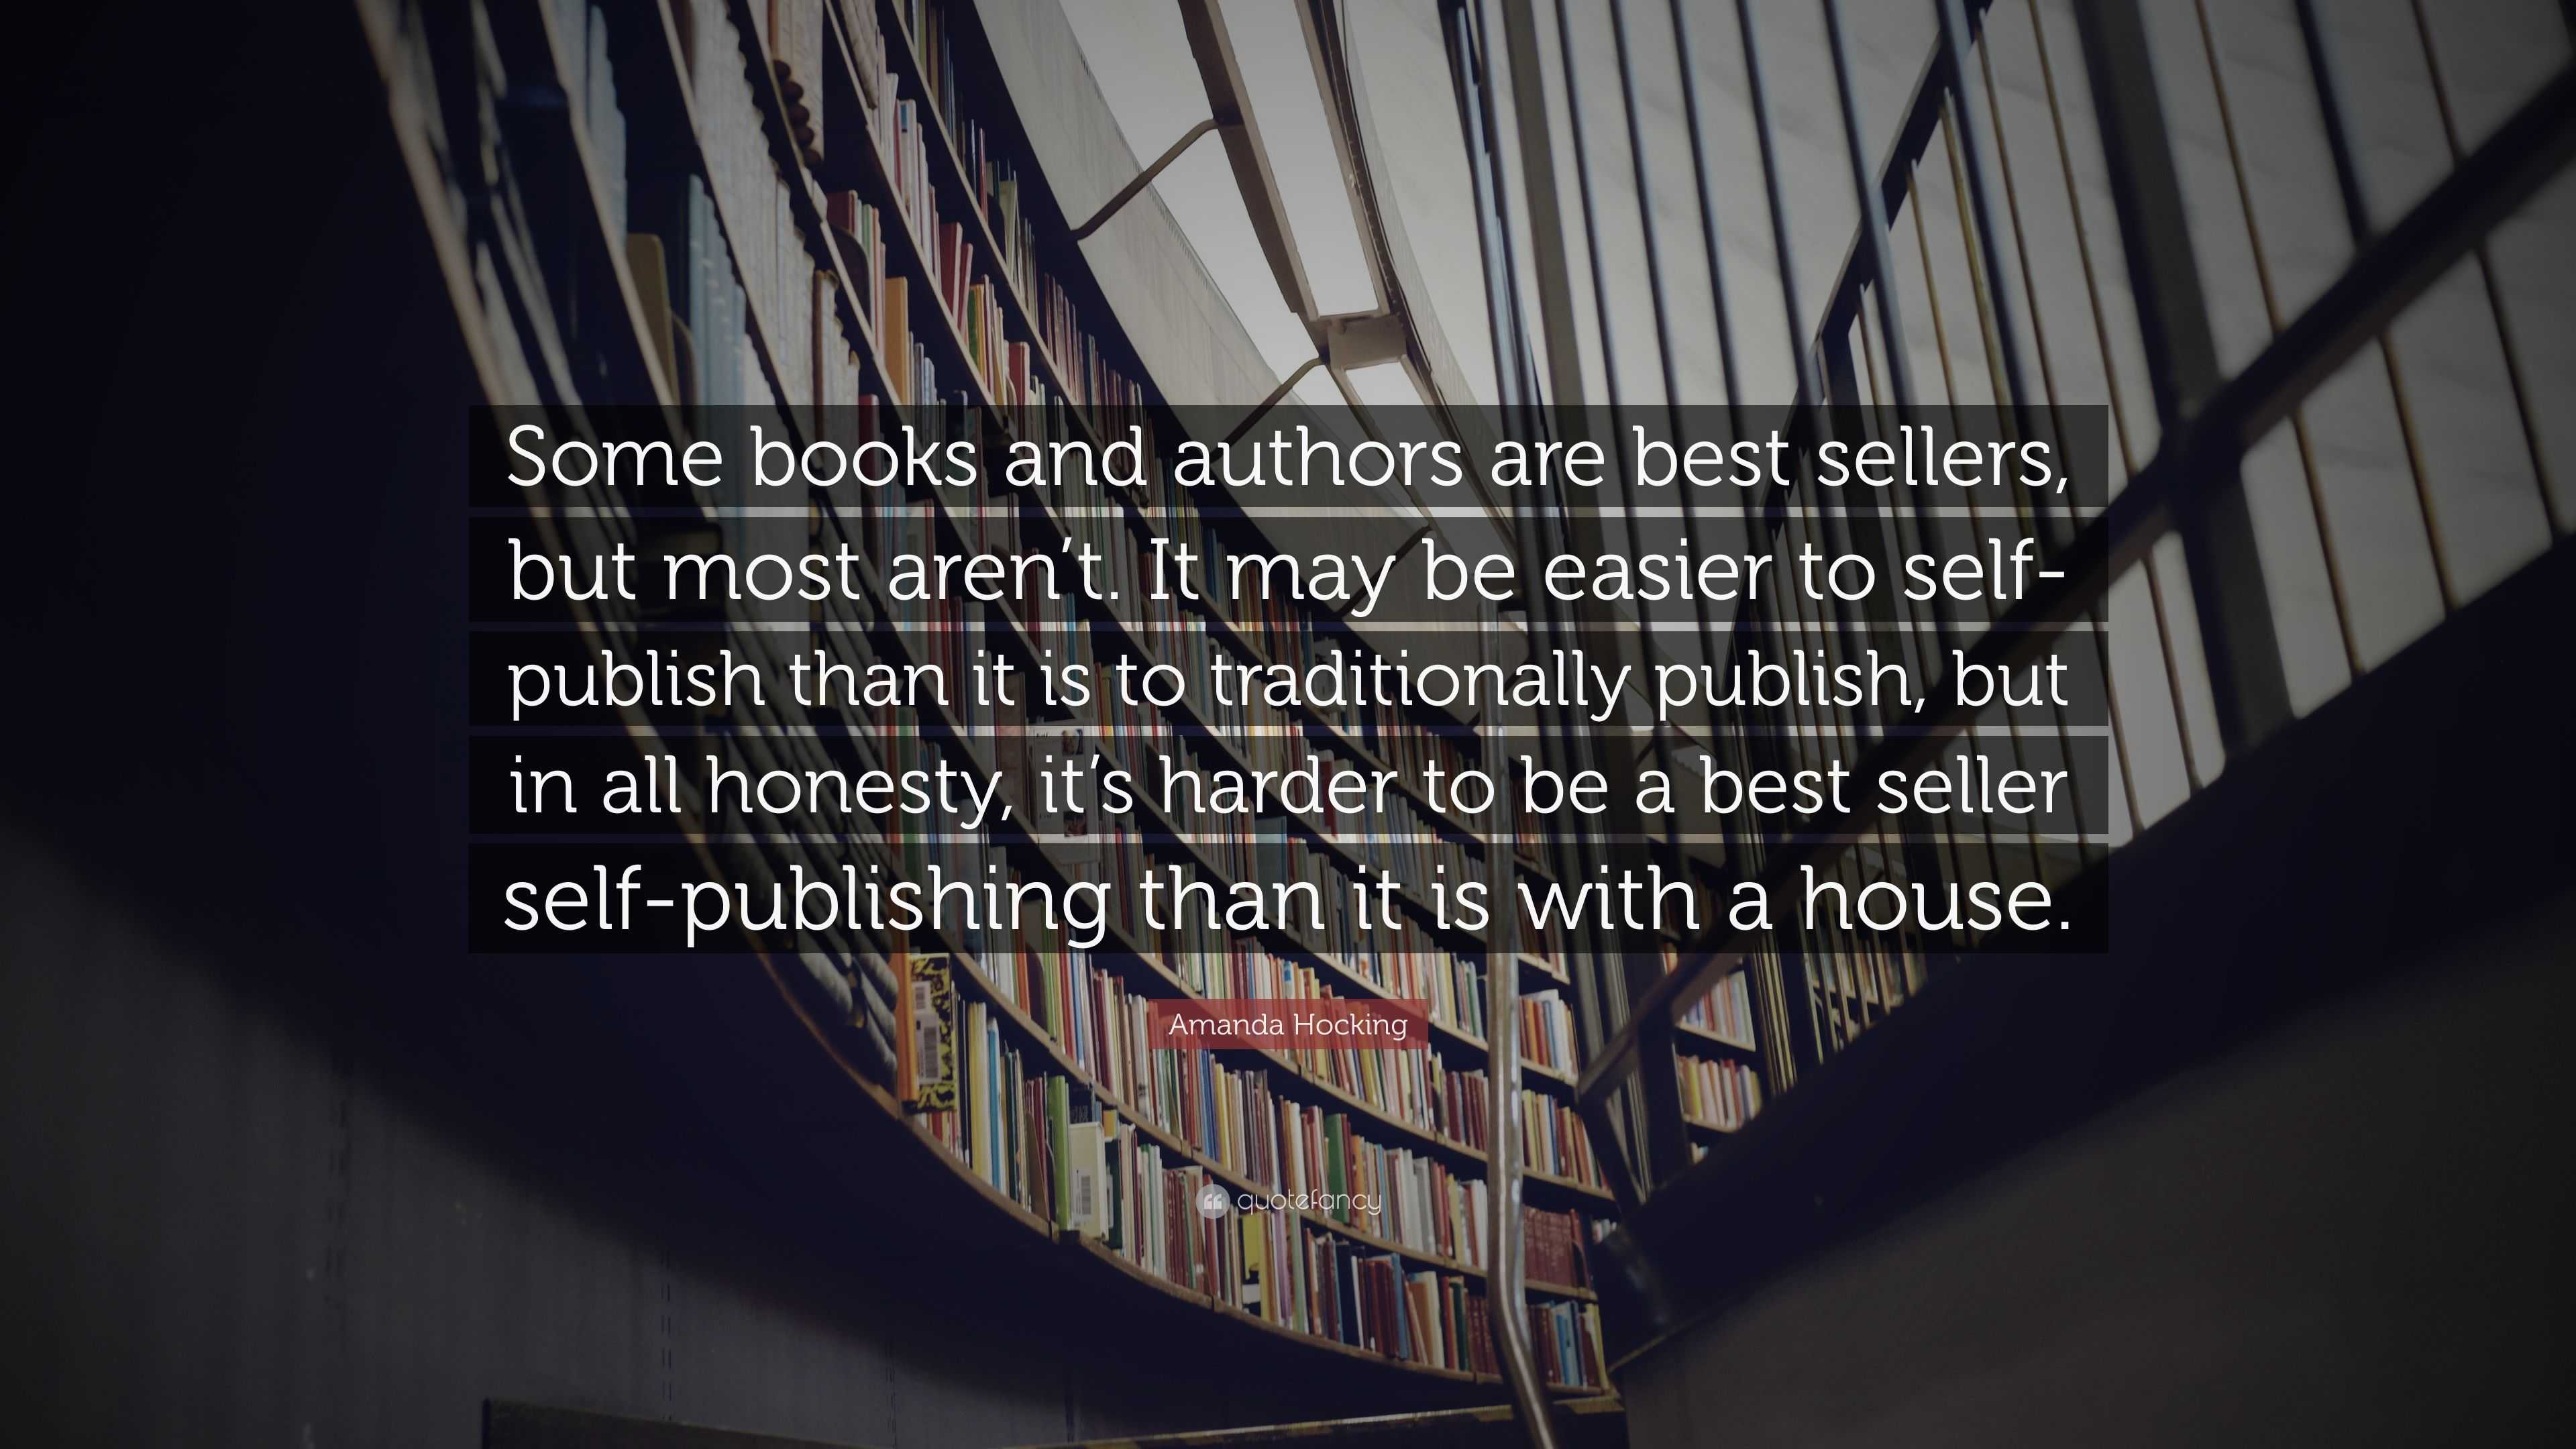 Amanda Hocking Quote: “Some books and authors are best sellers